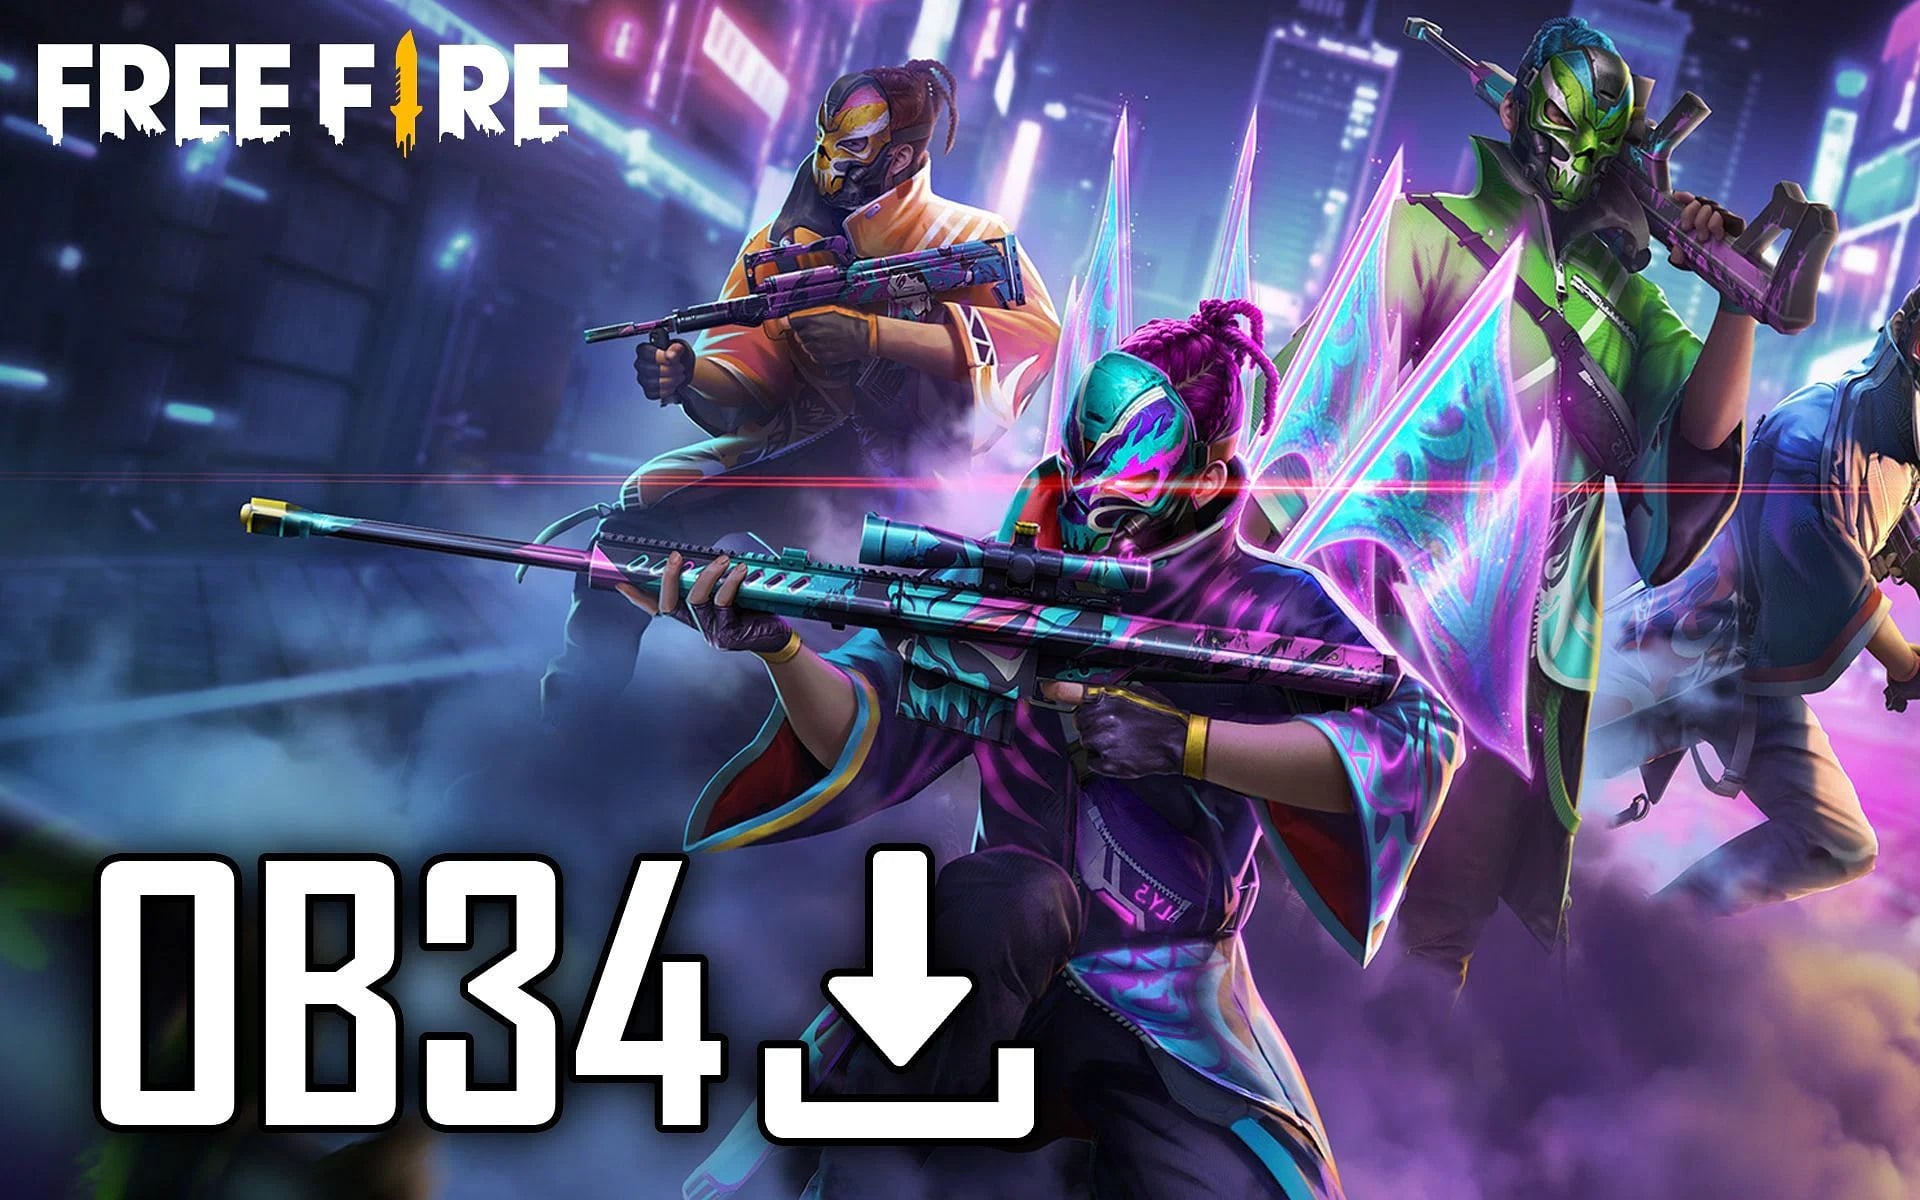 How to Download the OB34 Version of Garena Free Fire?